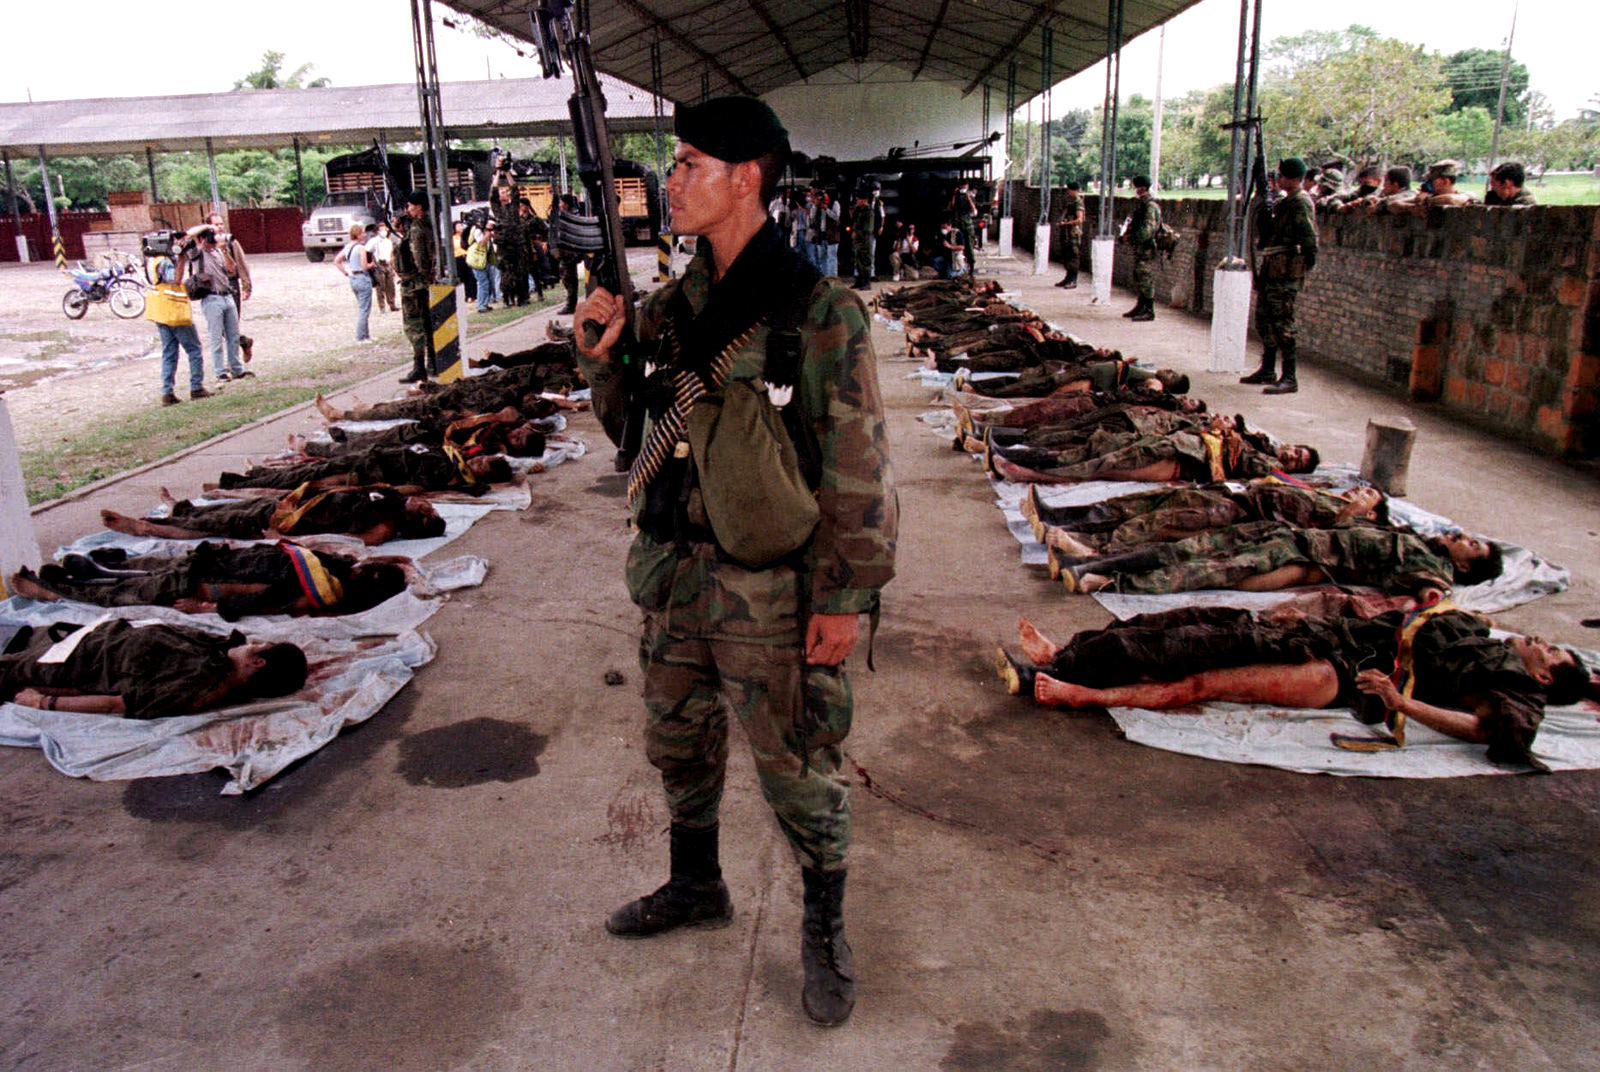 Colombian soldiers display the bodies of 30 Revolutionary Armed Forces of Colombia, or FARC, rebels to the prress in Granada, about 180 kilometers (112 miles) outside of Bogota, Colombia, Monday, July 12, 1999. (AP/Scott Dalton)